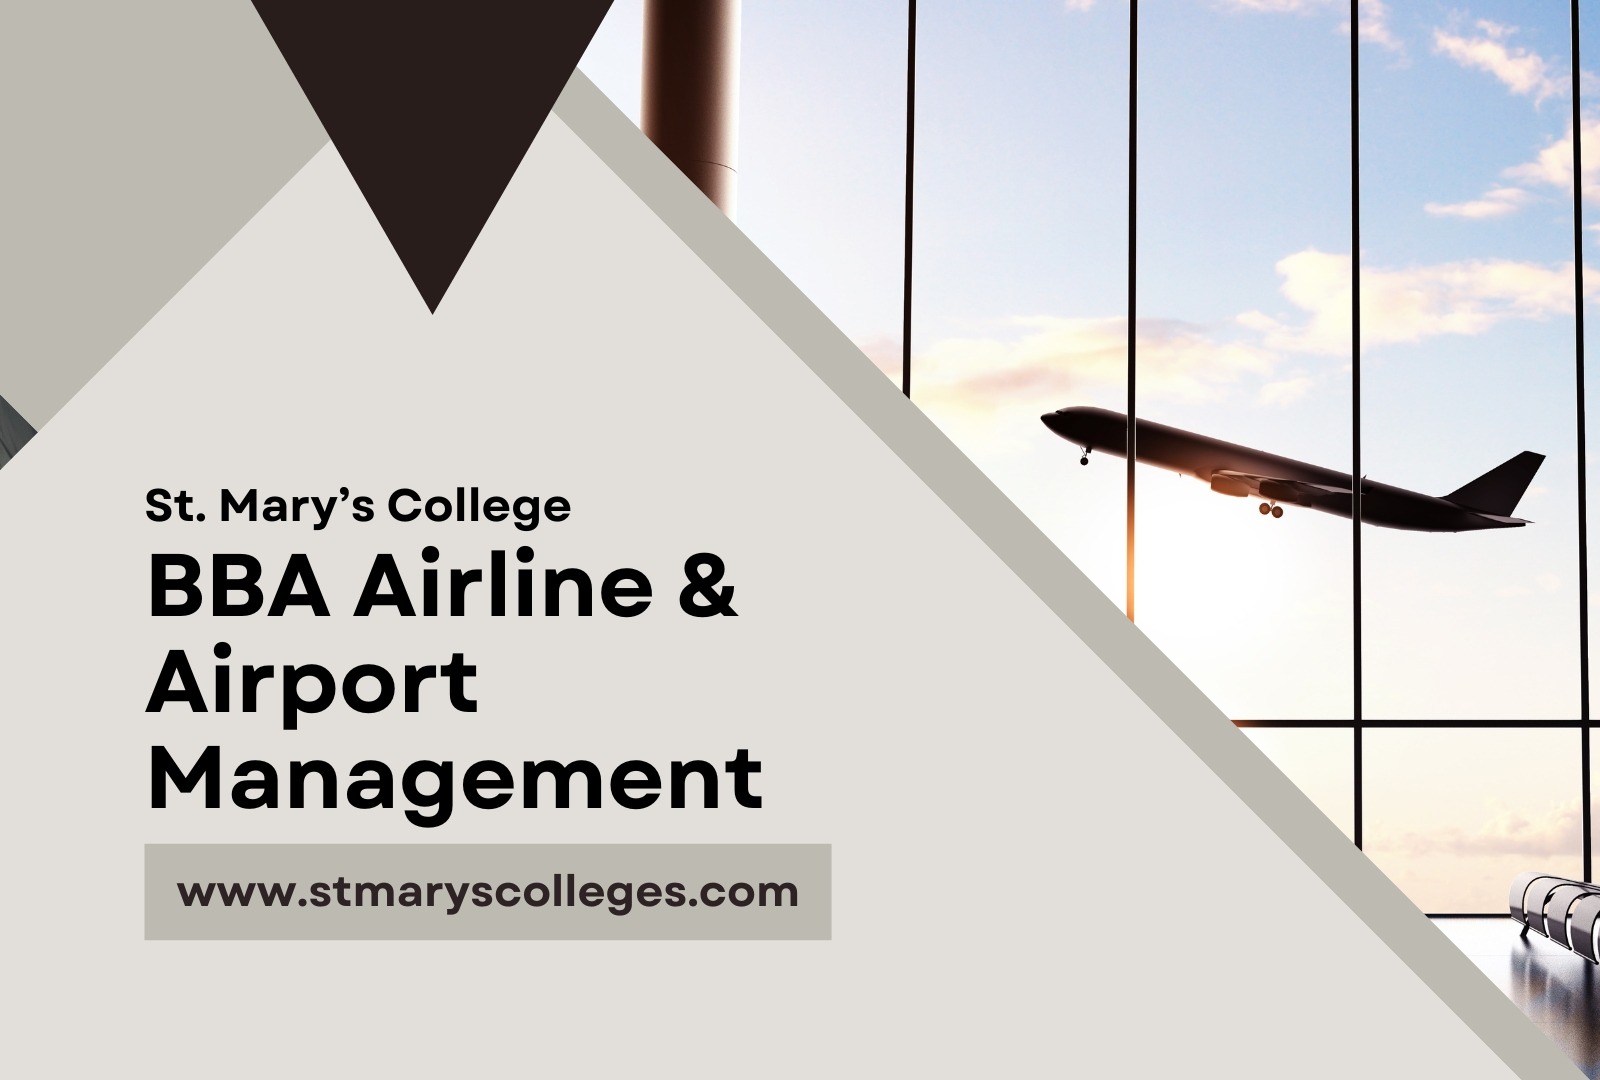 BBA AIRLINE & AIRPORT MANAGEMENT